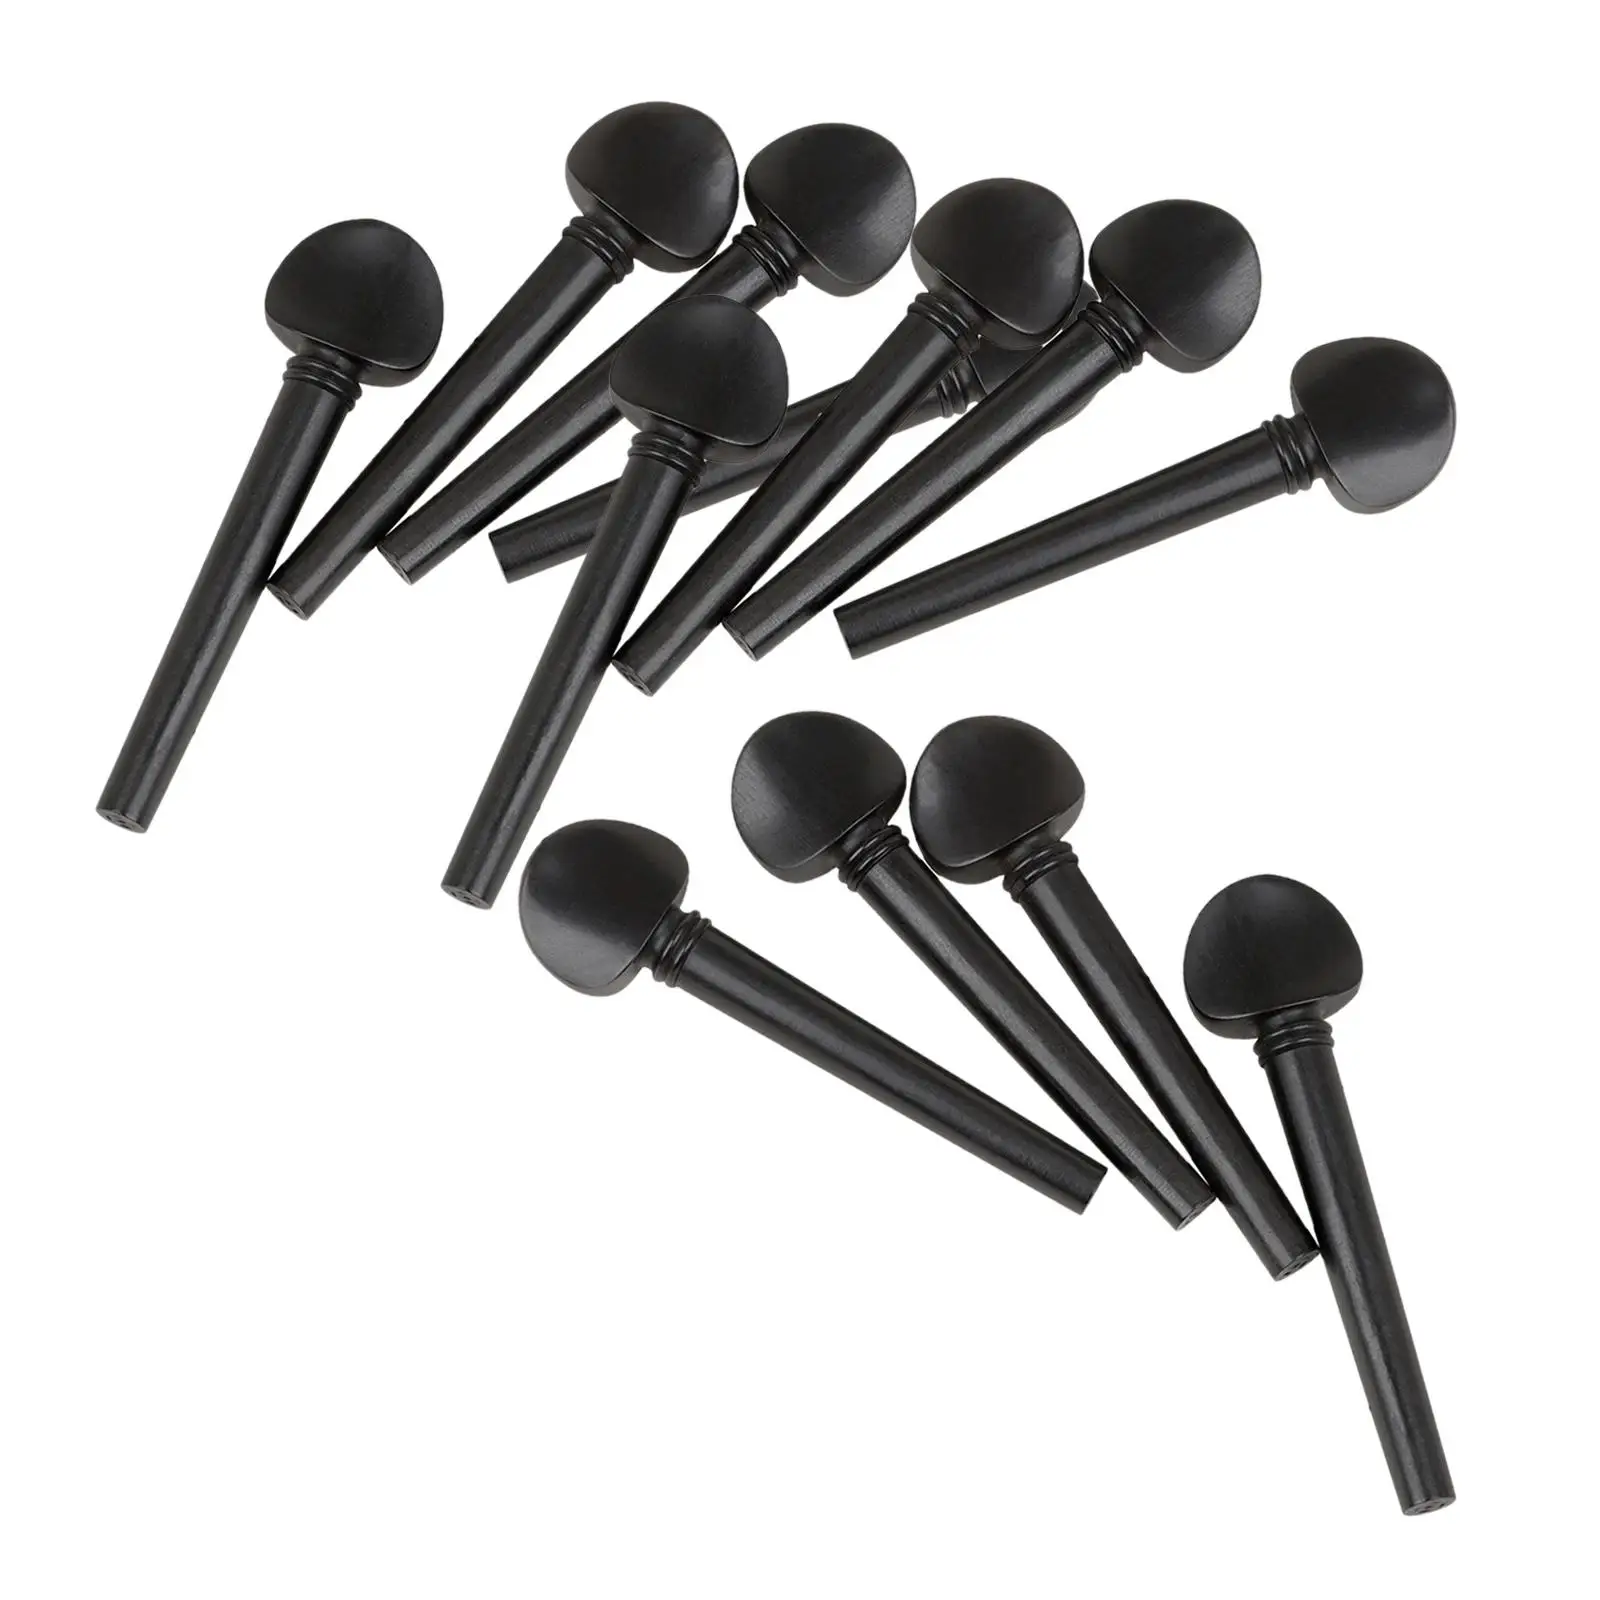 12 Pieces 3/4 4/4 Size Violin Tuning Pegs Fiddle Tuning Pegs Violin Accessories Replacement Parts